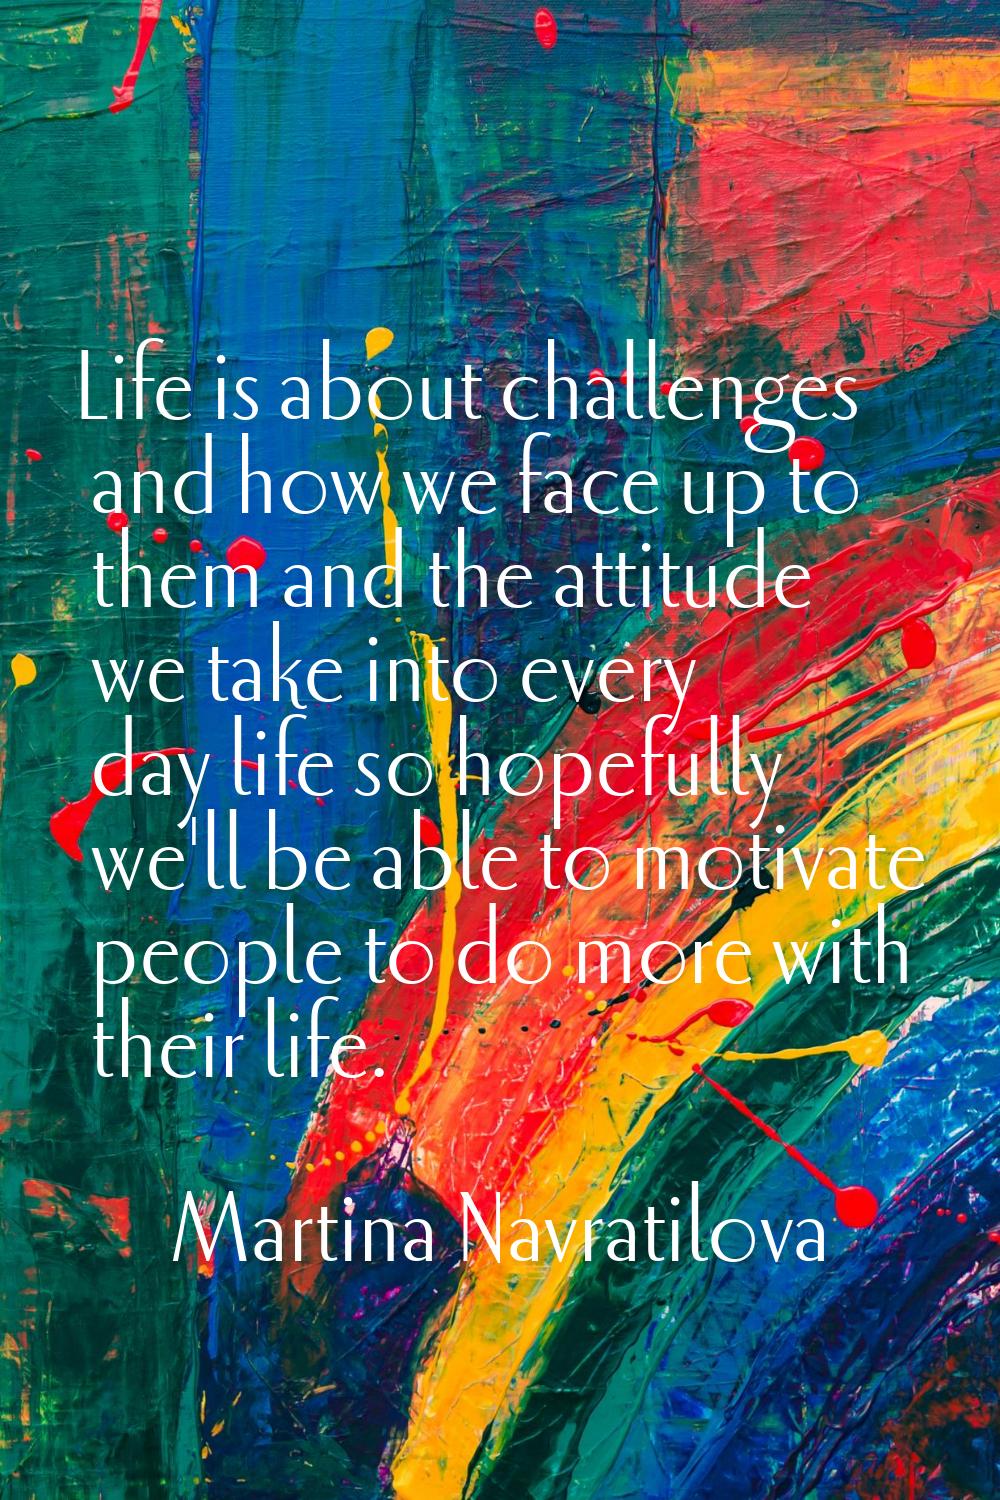 Life is about challenges and how we face up to them and the attitude we take into every day life so